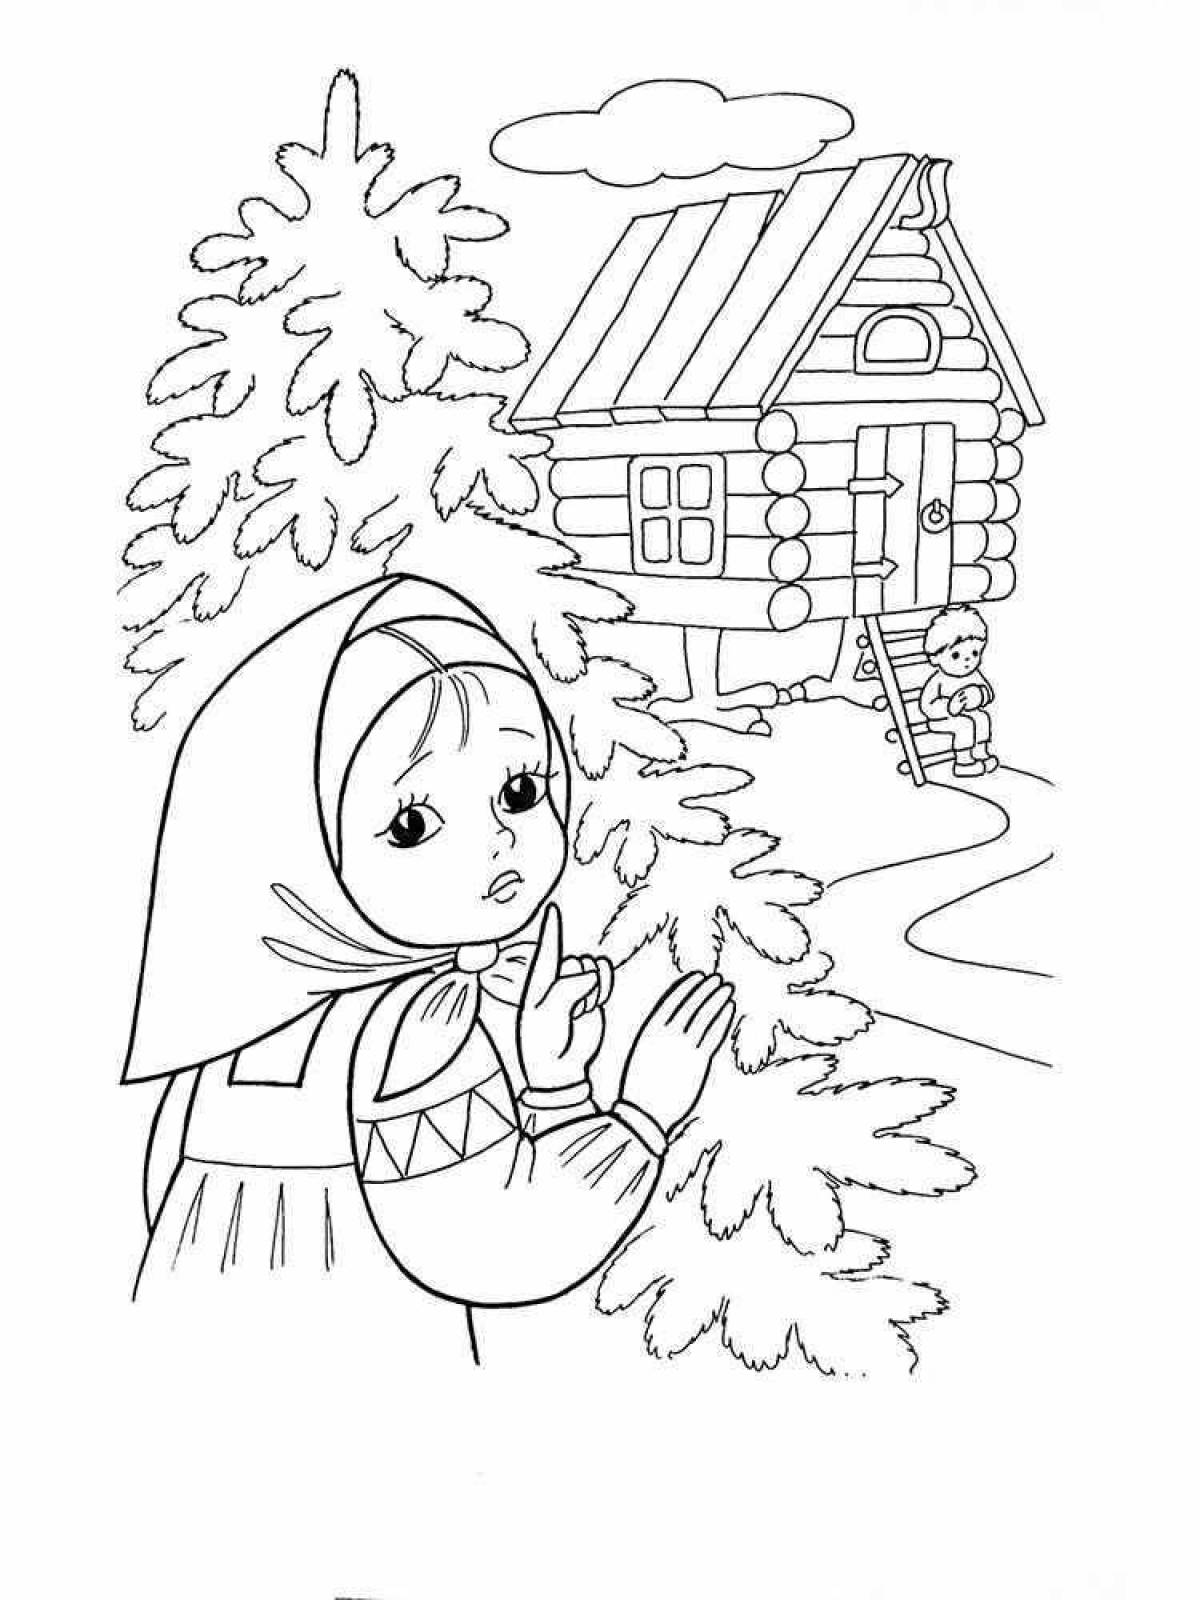 Joyful swan geese coloring pages for kids